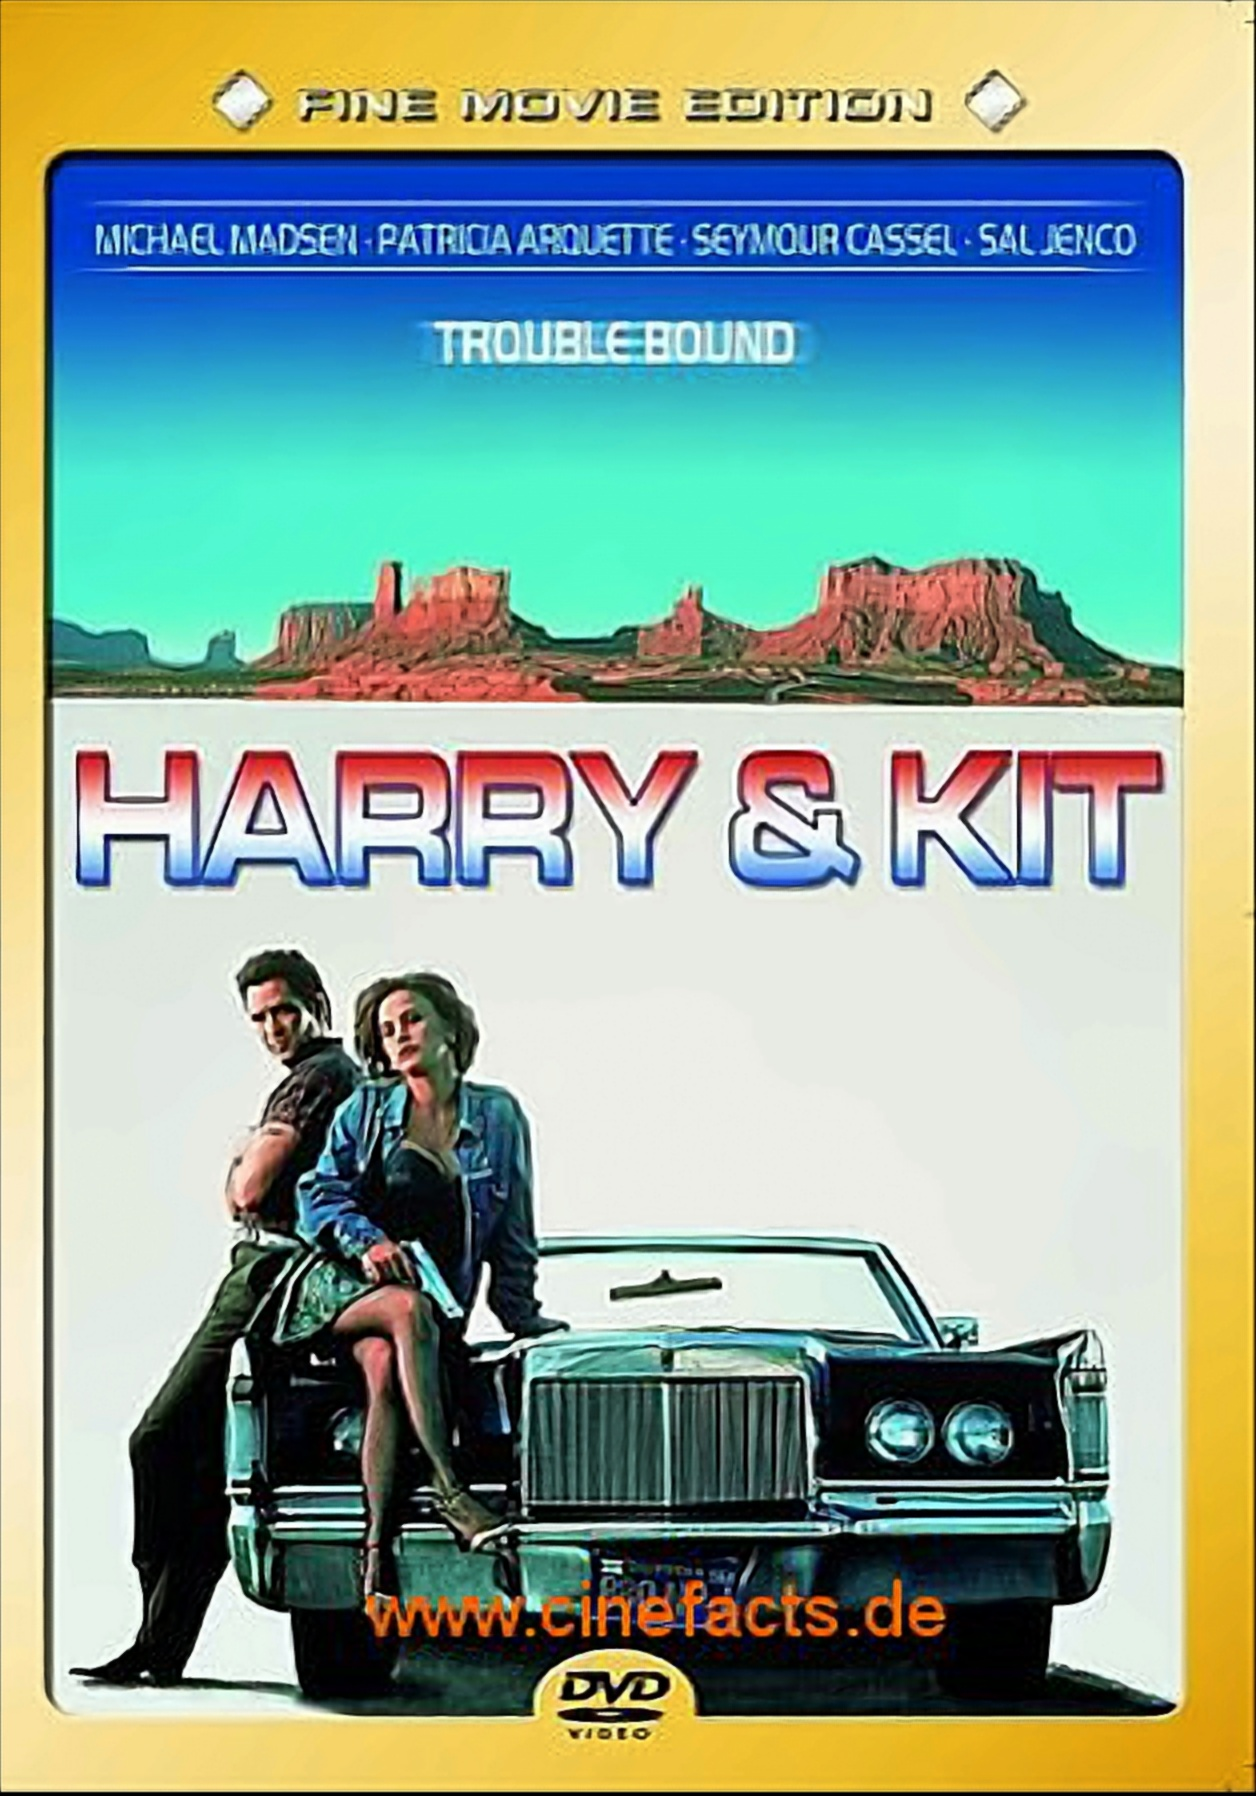 Harry & Kit - DVD Bound Trouble